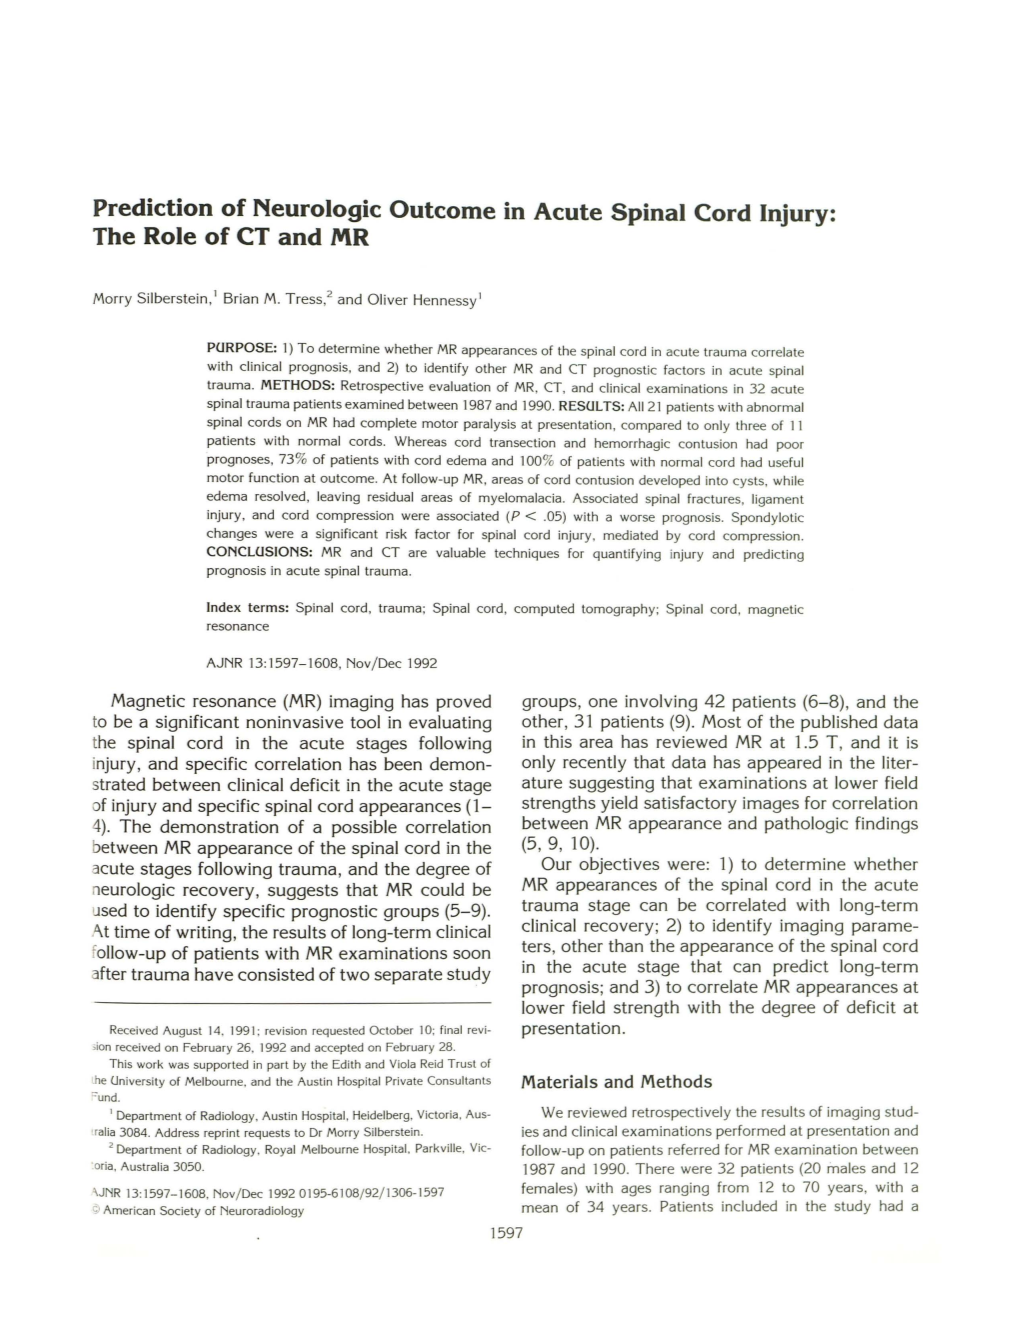 Prediction of Neurologic Outcome in Acute Spinal Cord Injury: the Role of CT and MR